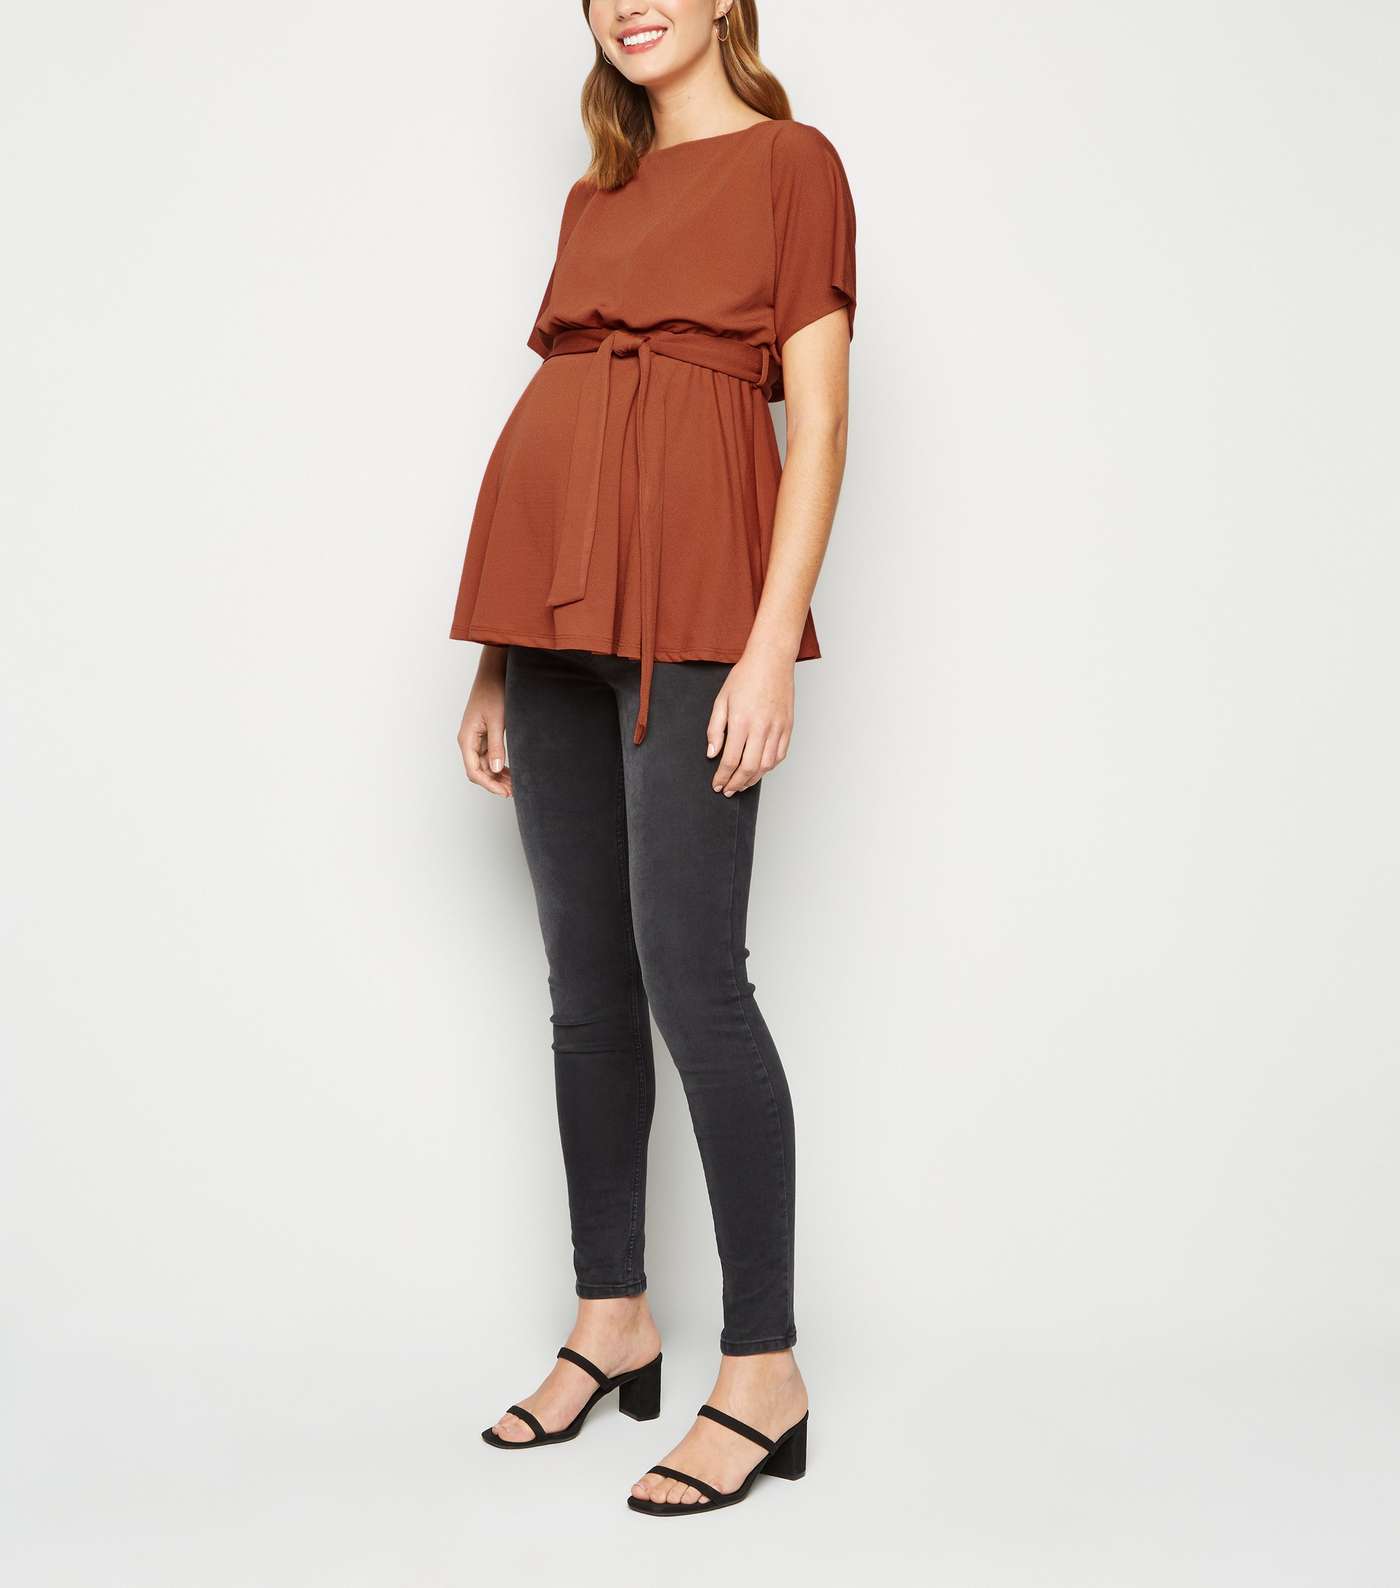 Maternity Rust Batwing Top Image 2